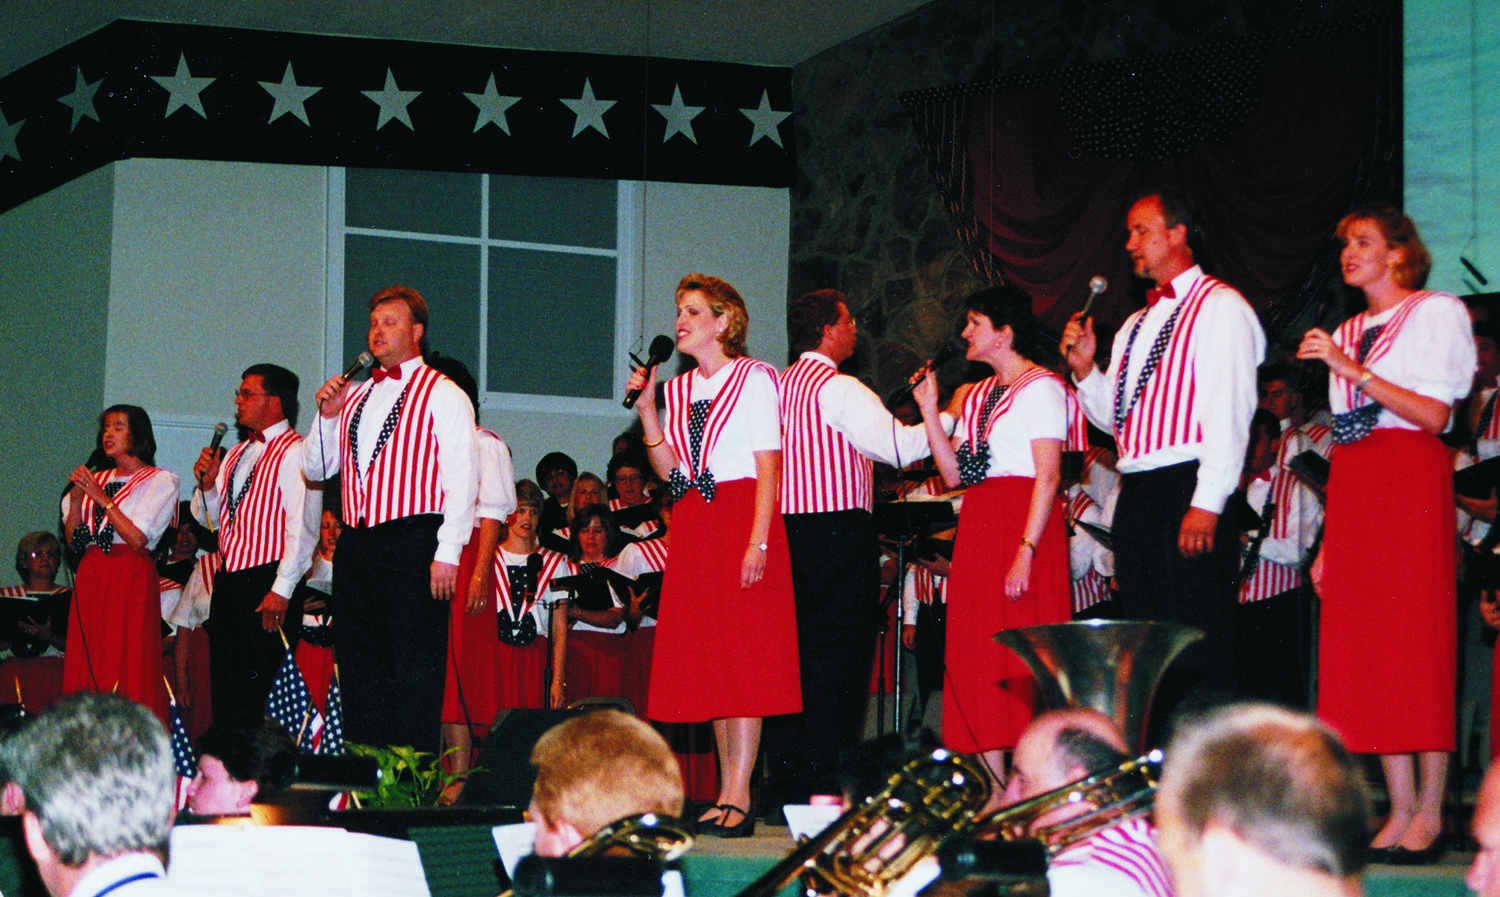 Singers in patriotic outfits lead worship at Hebron Baptist Church in Dacula, Ga., during a service in 1991. The church celebrated its 180th anniversary this past Sunday. (Photo/Hebron Baptist Church)